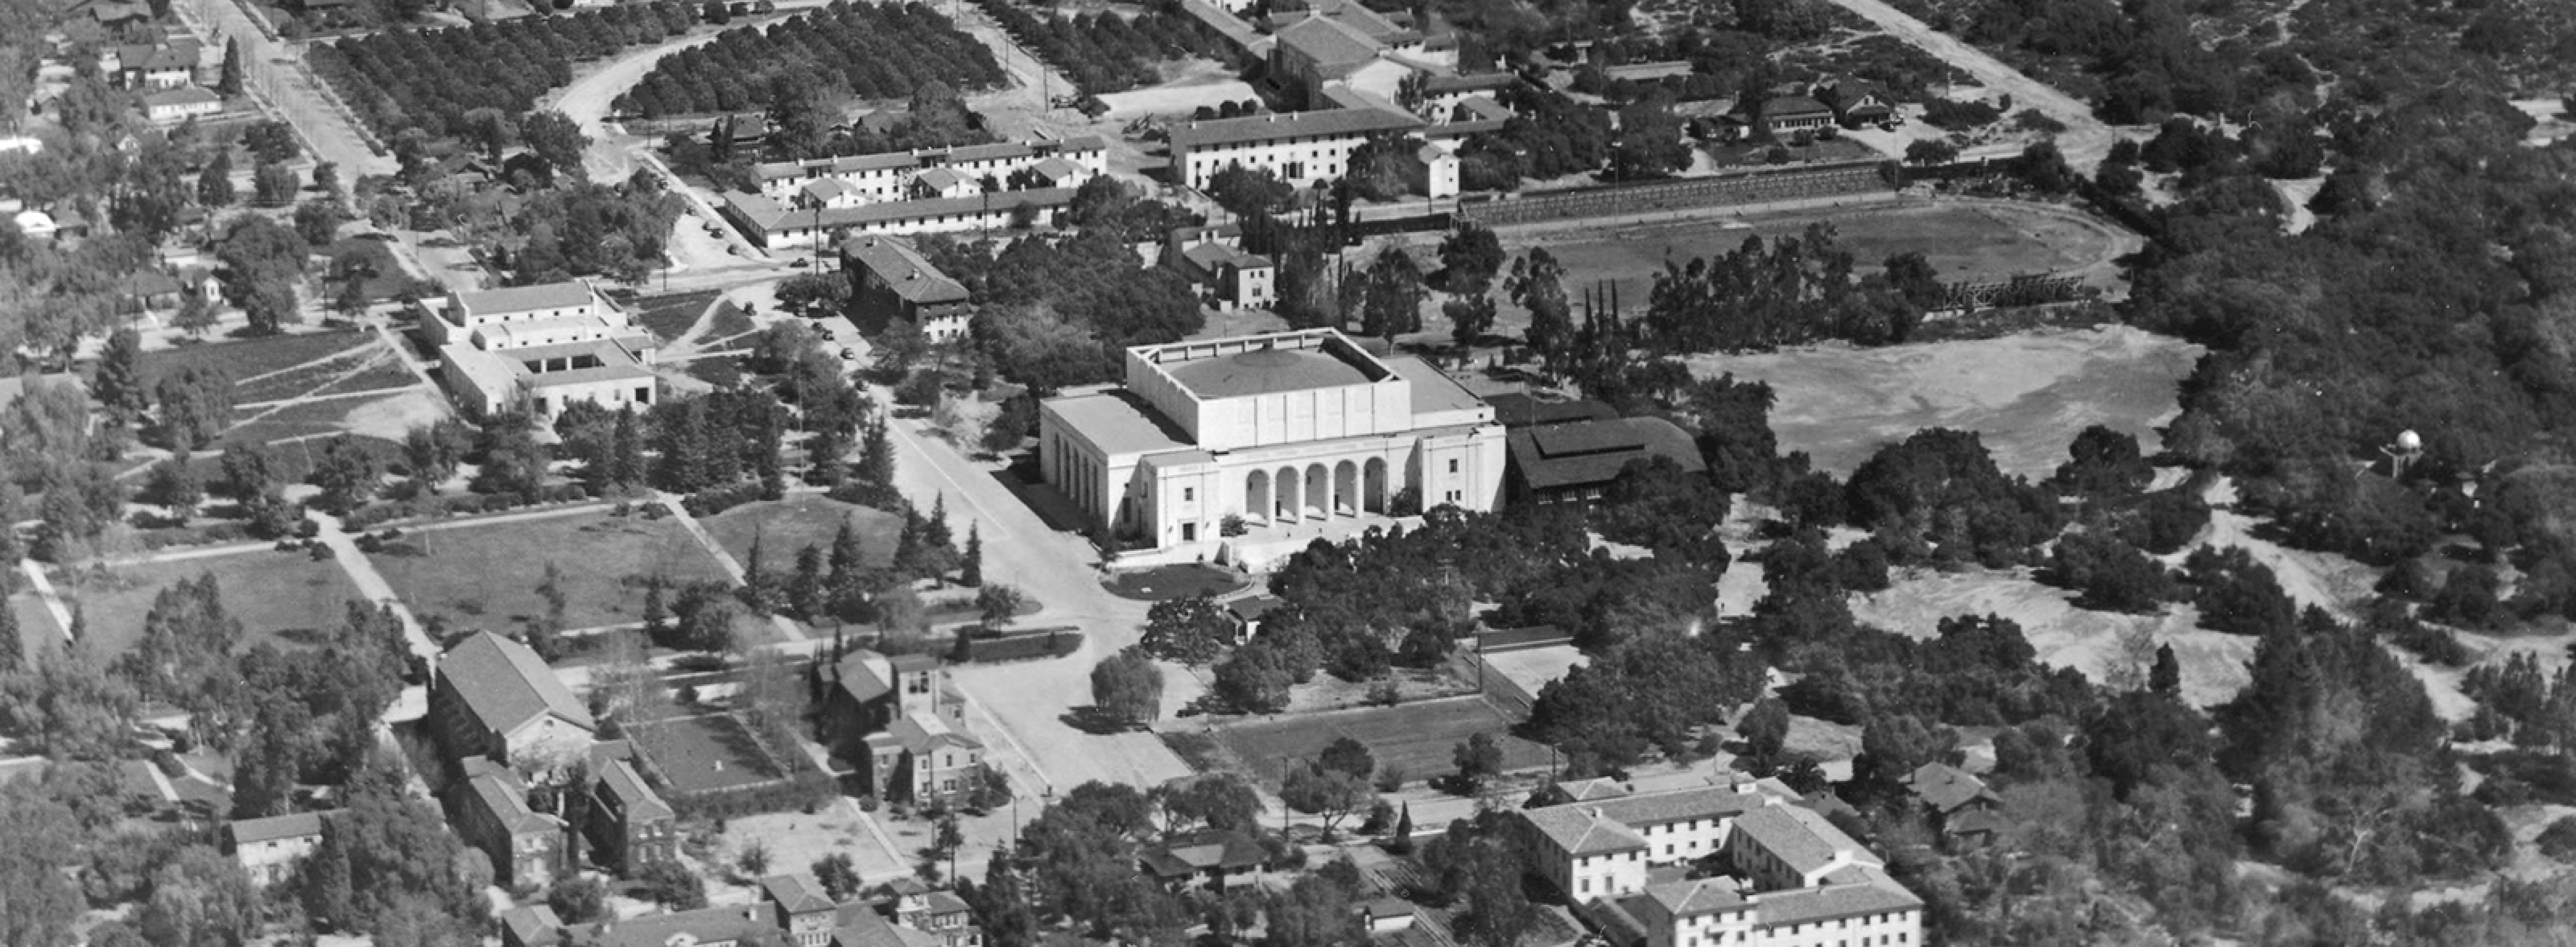 Aerial shot of Pomona College's Bridges Auditorium, where the first convocation was held.